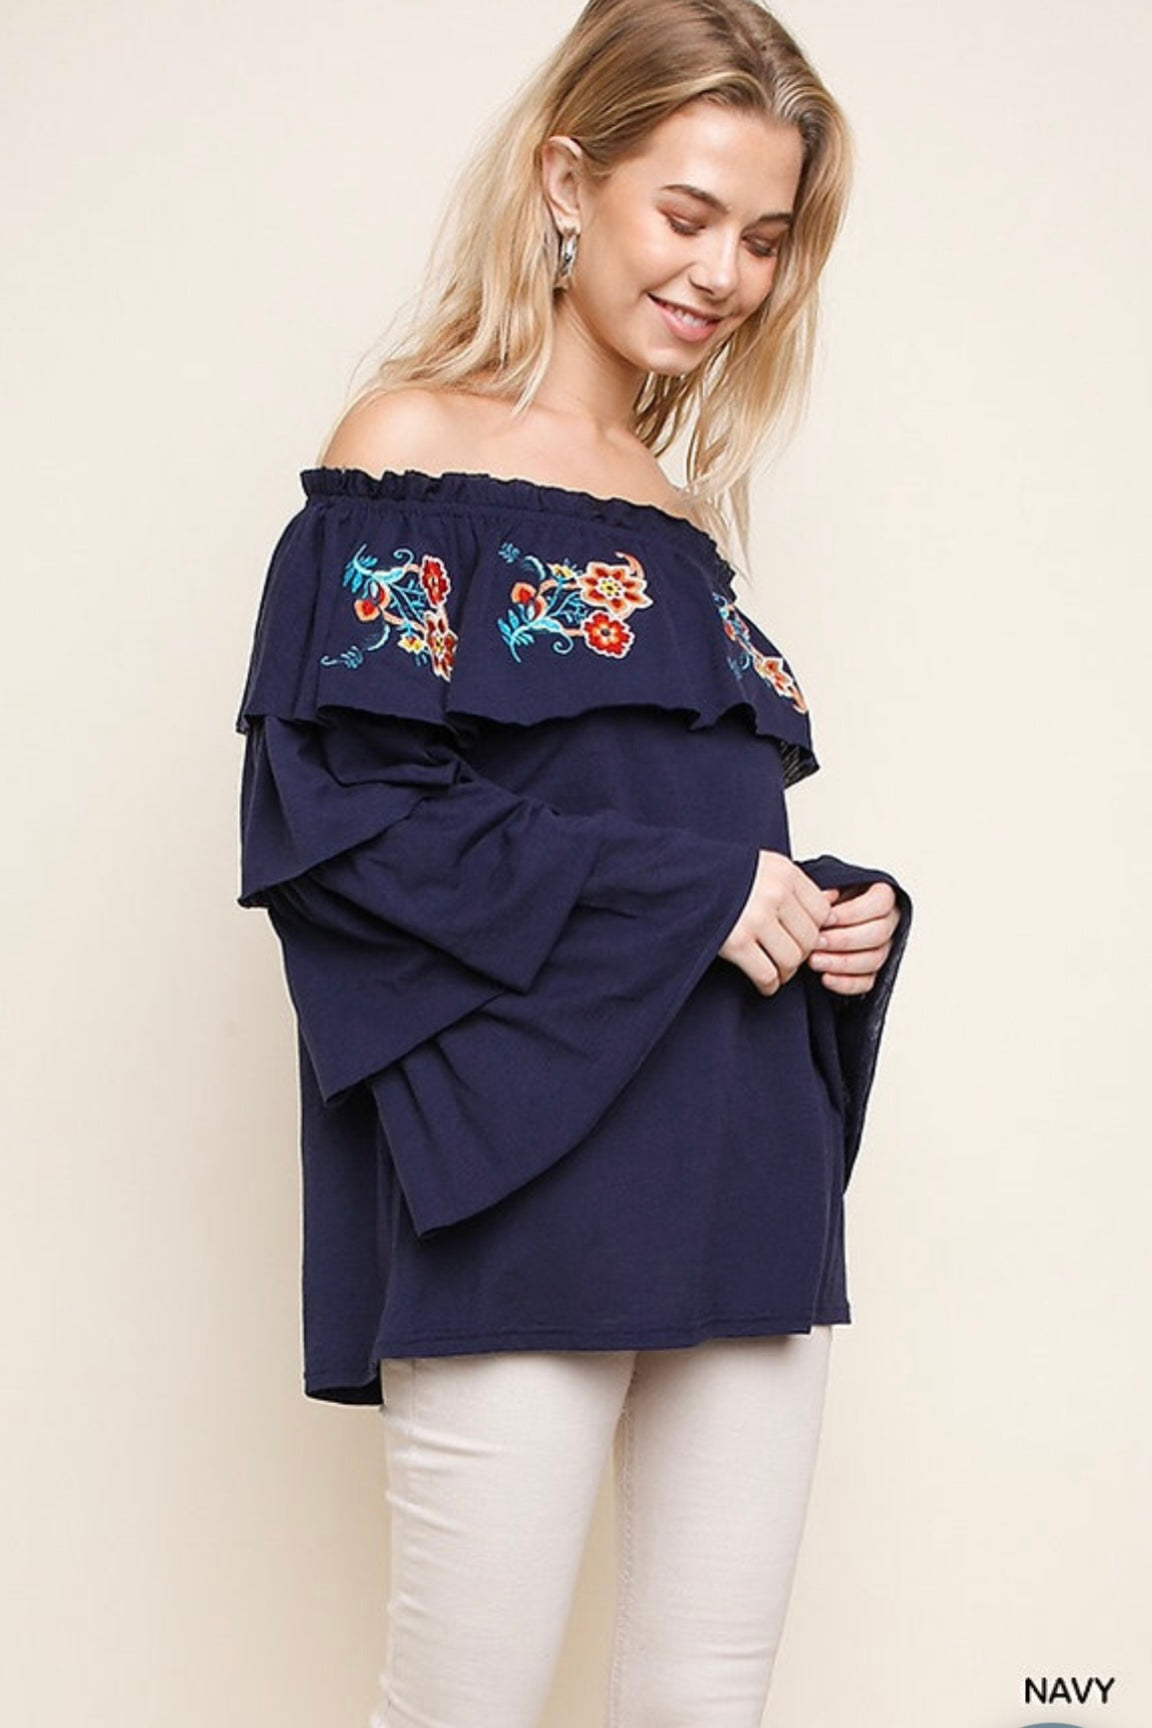 Floral Embroidered Ruffle Off Shoulder Top